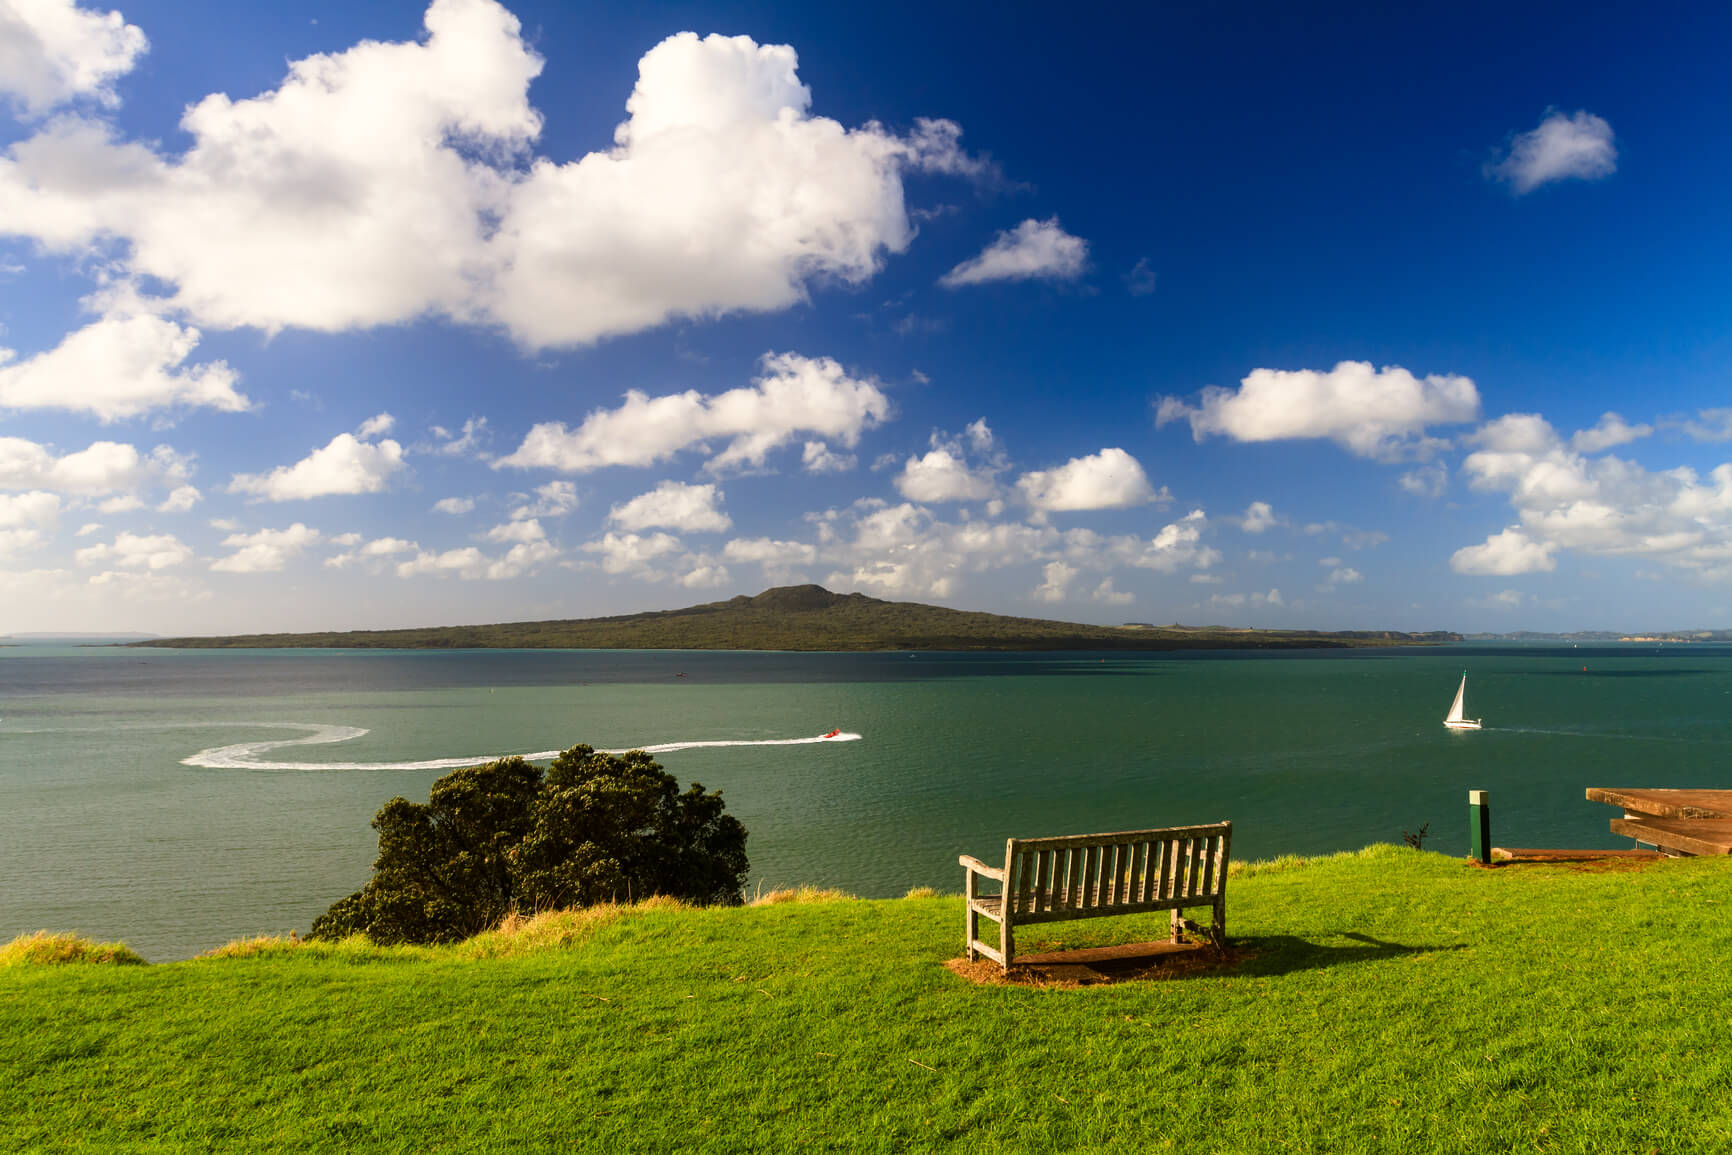 <div class='expired'>EXPIRED</div>Edmonton, Canada to Auckland, New Zealand for only $930 CAD roundtrip | Secret Flying